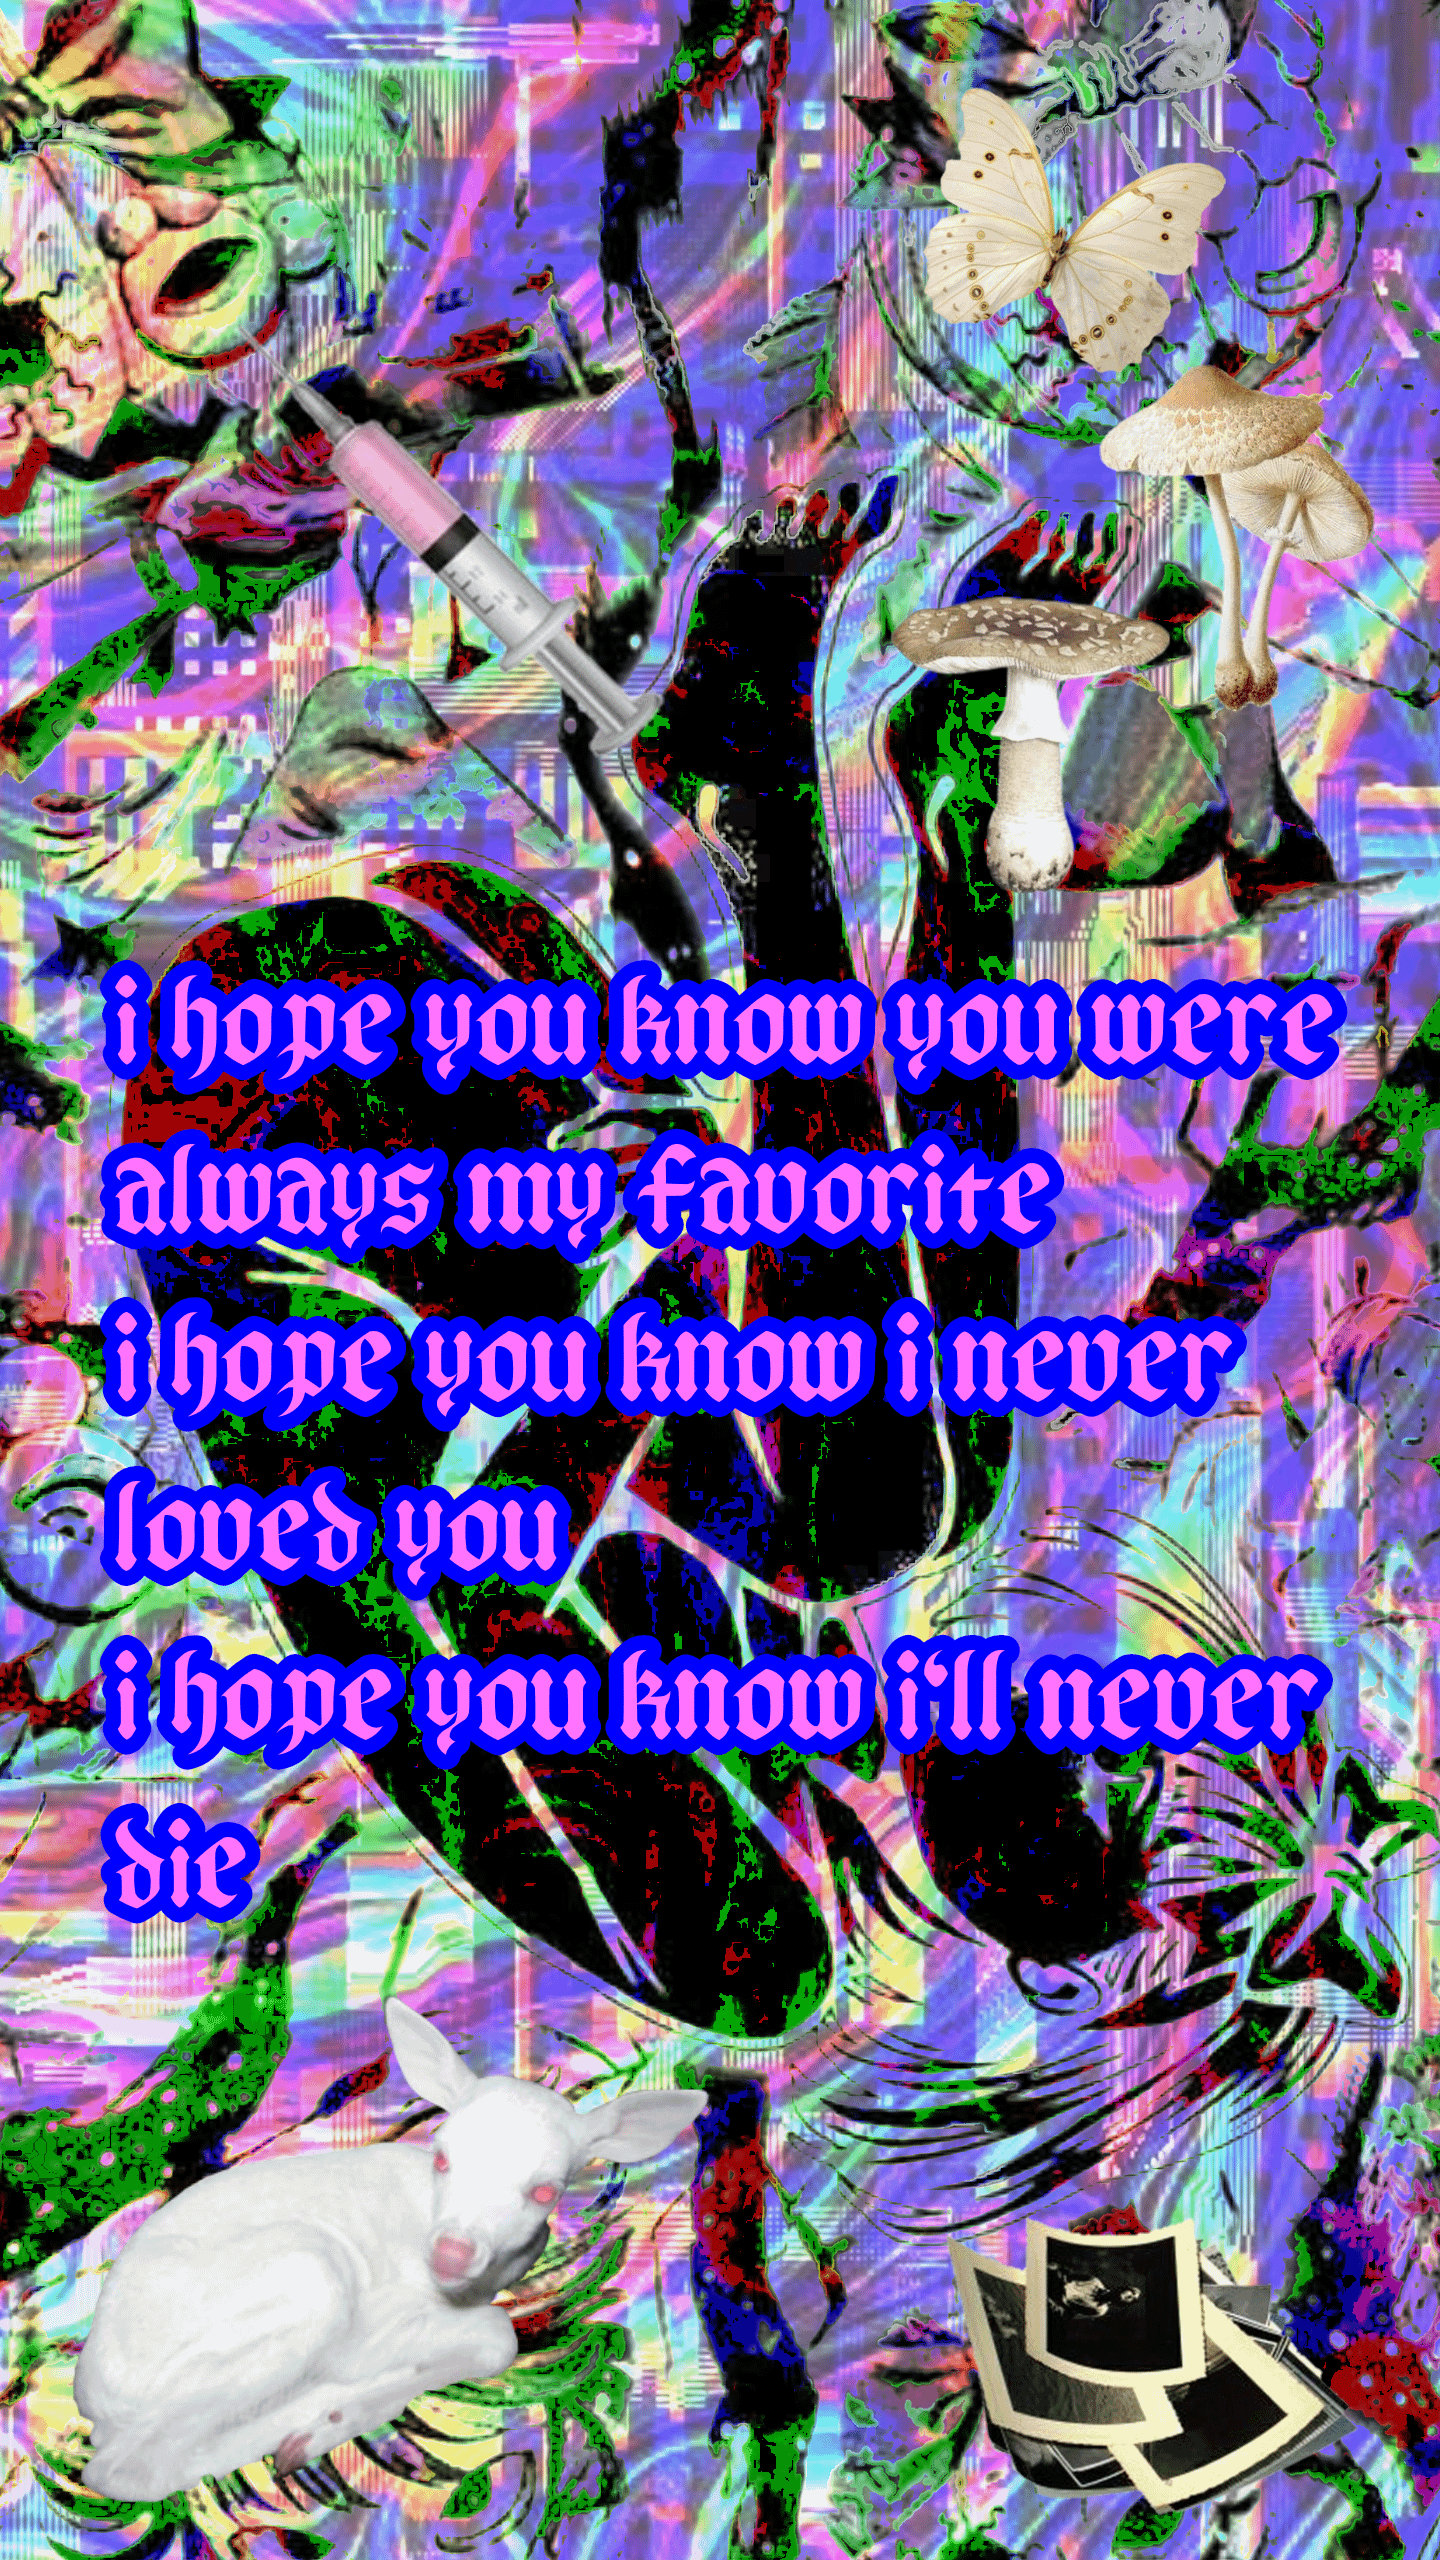 A colorful image with text that says 